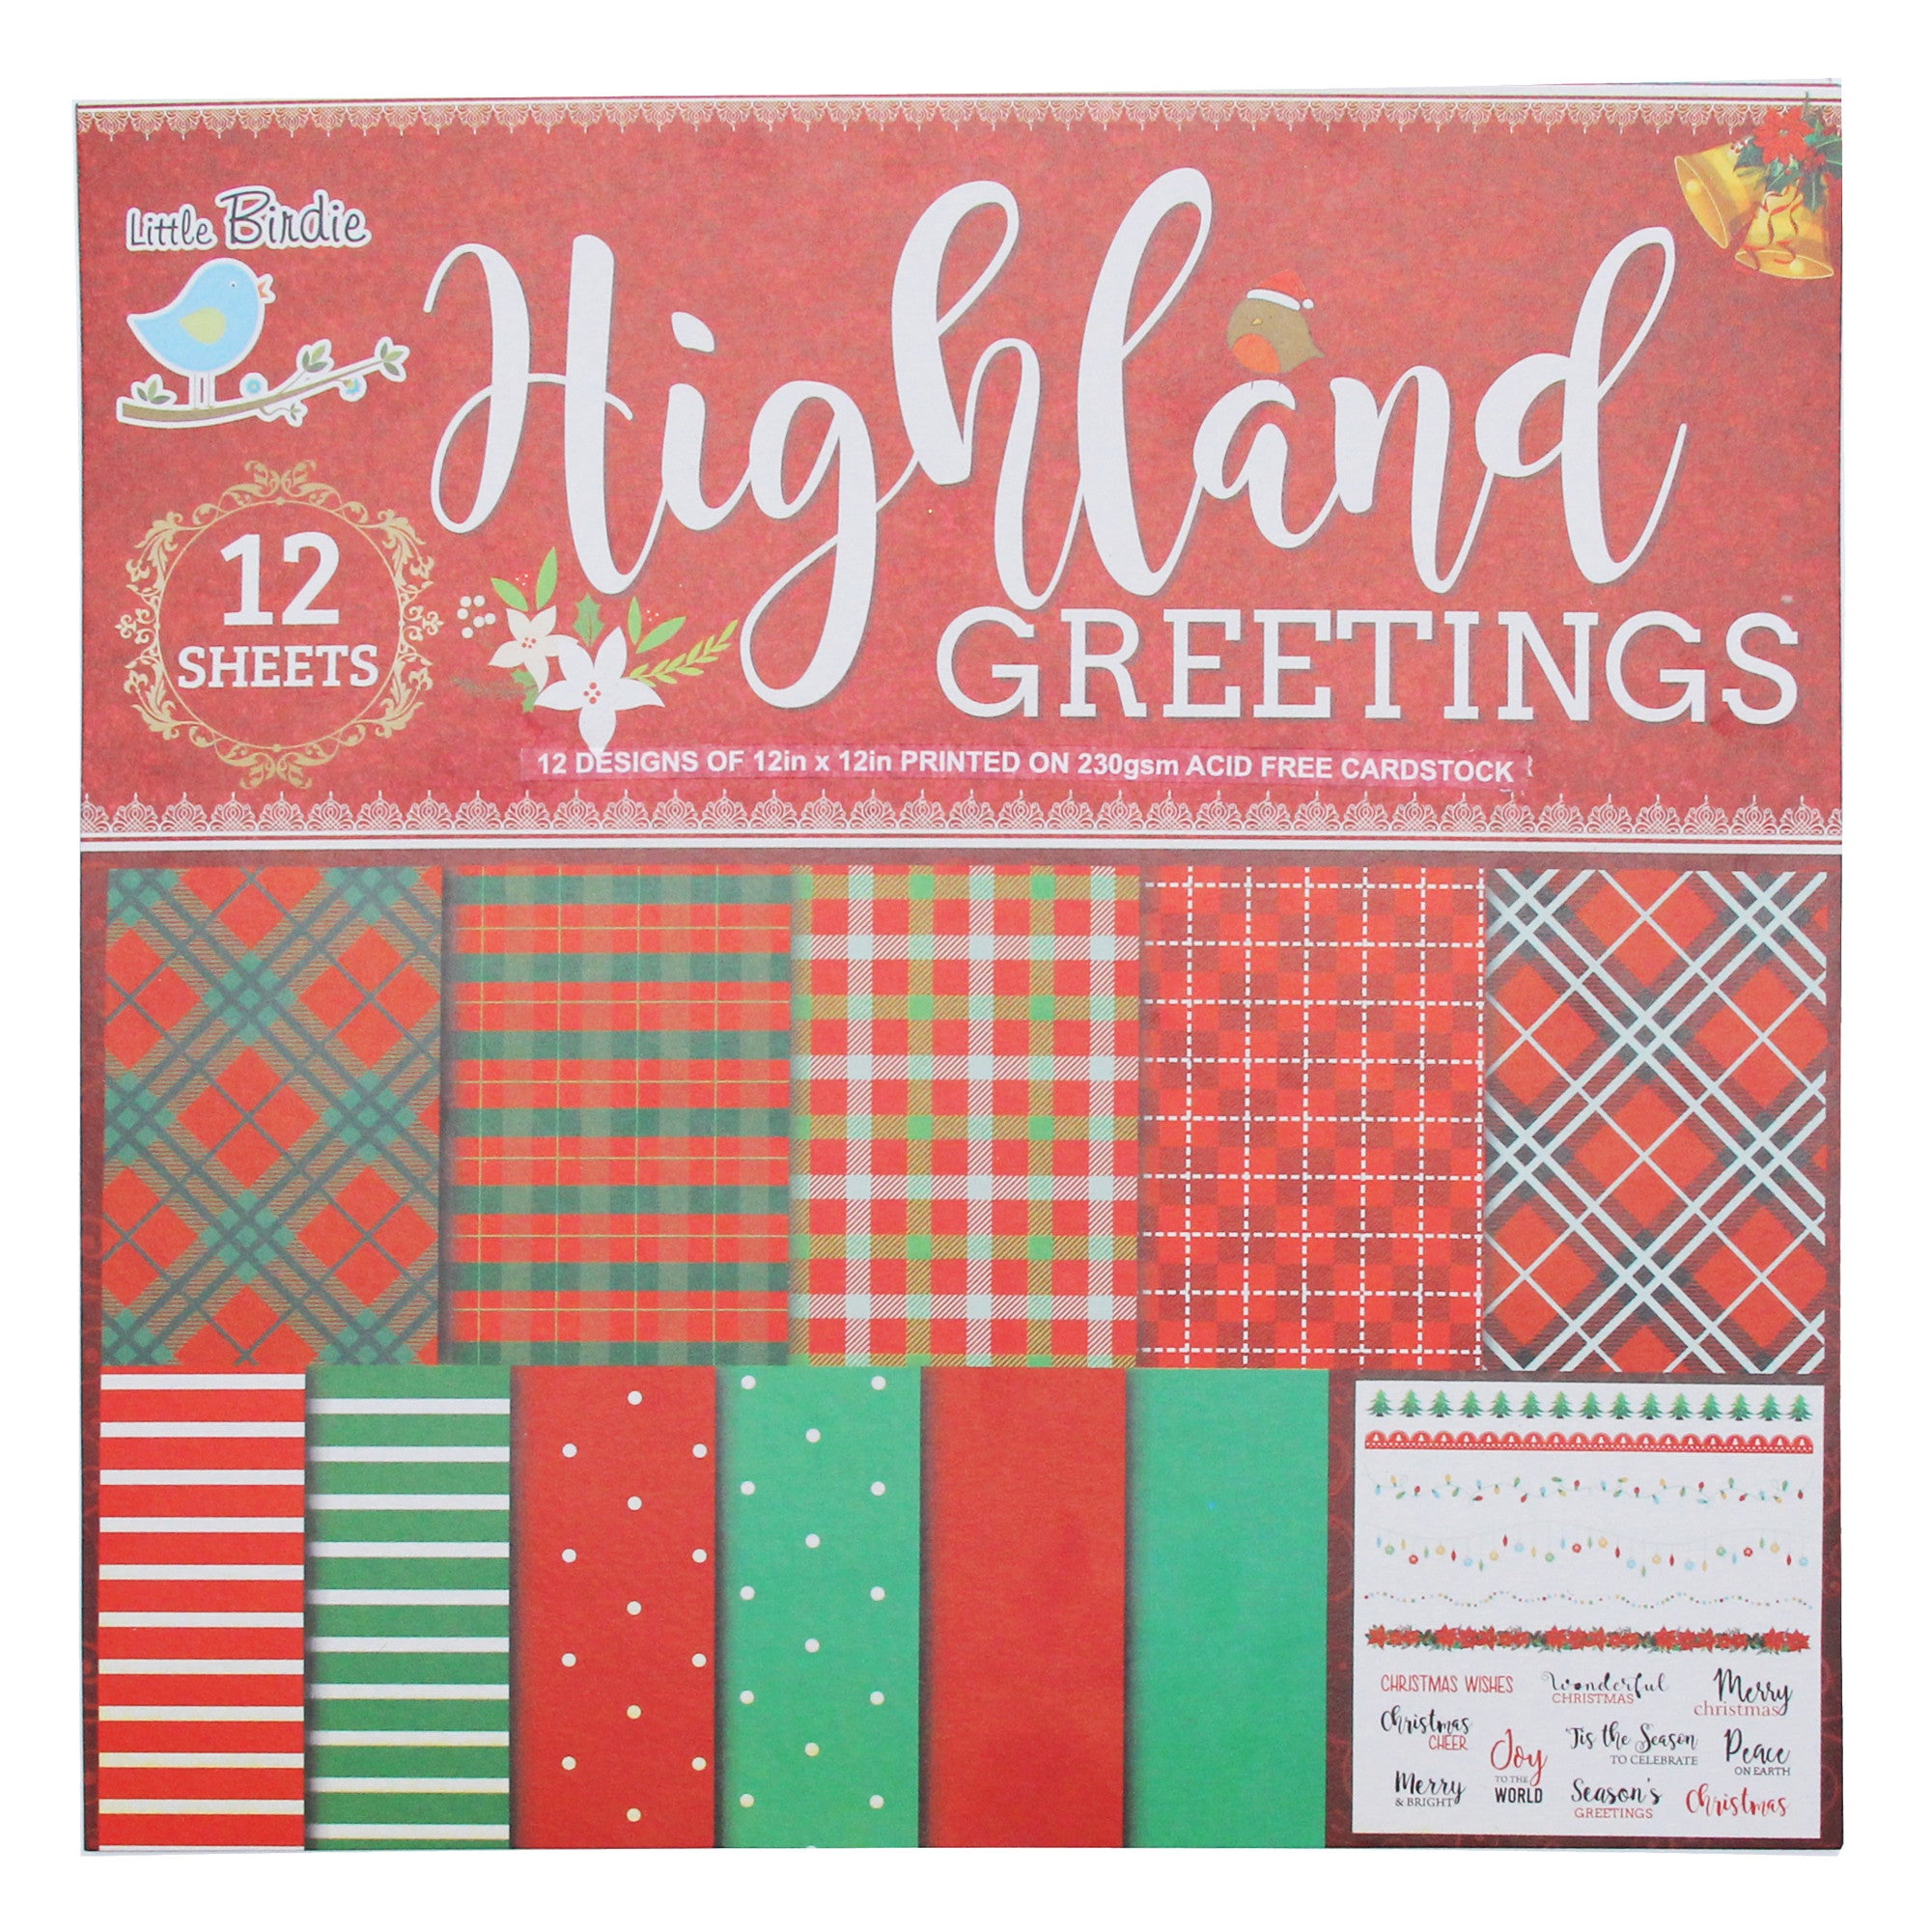 Itsy Bitsy Highland Greetings- 12x12Inch Paper Pack, 12 sheet